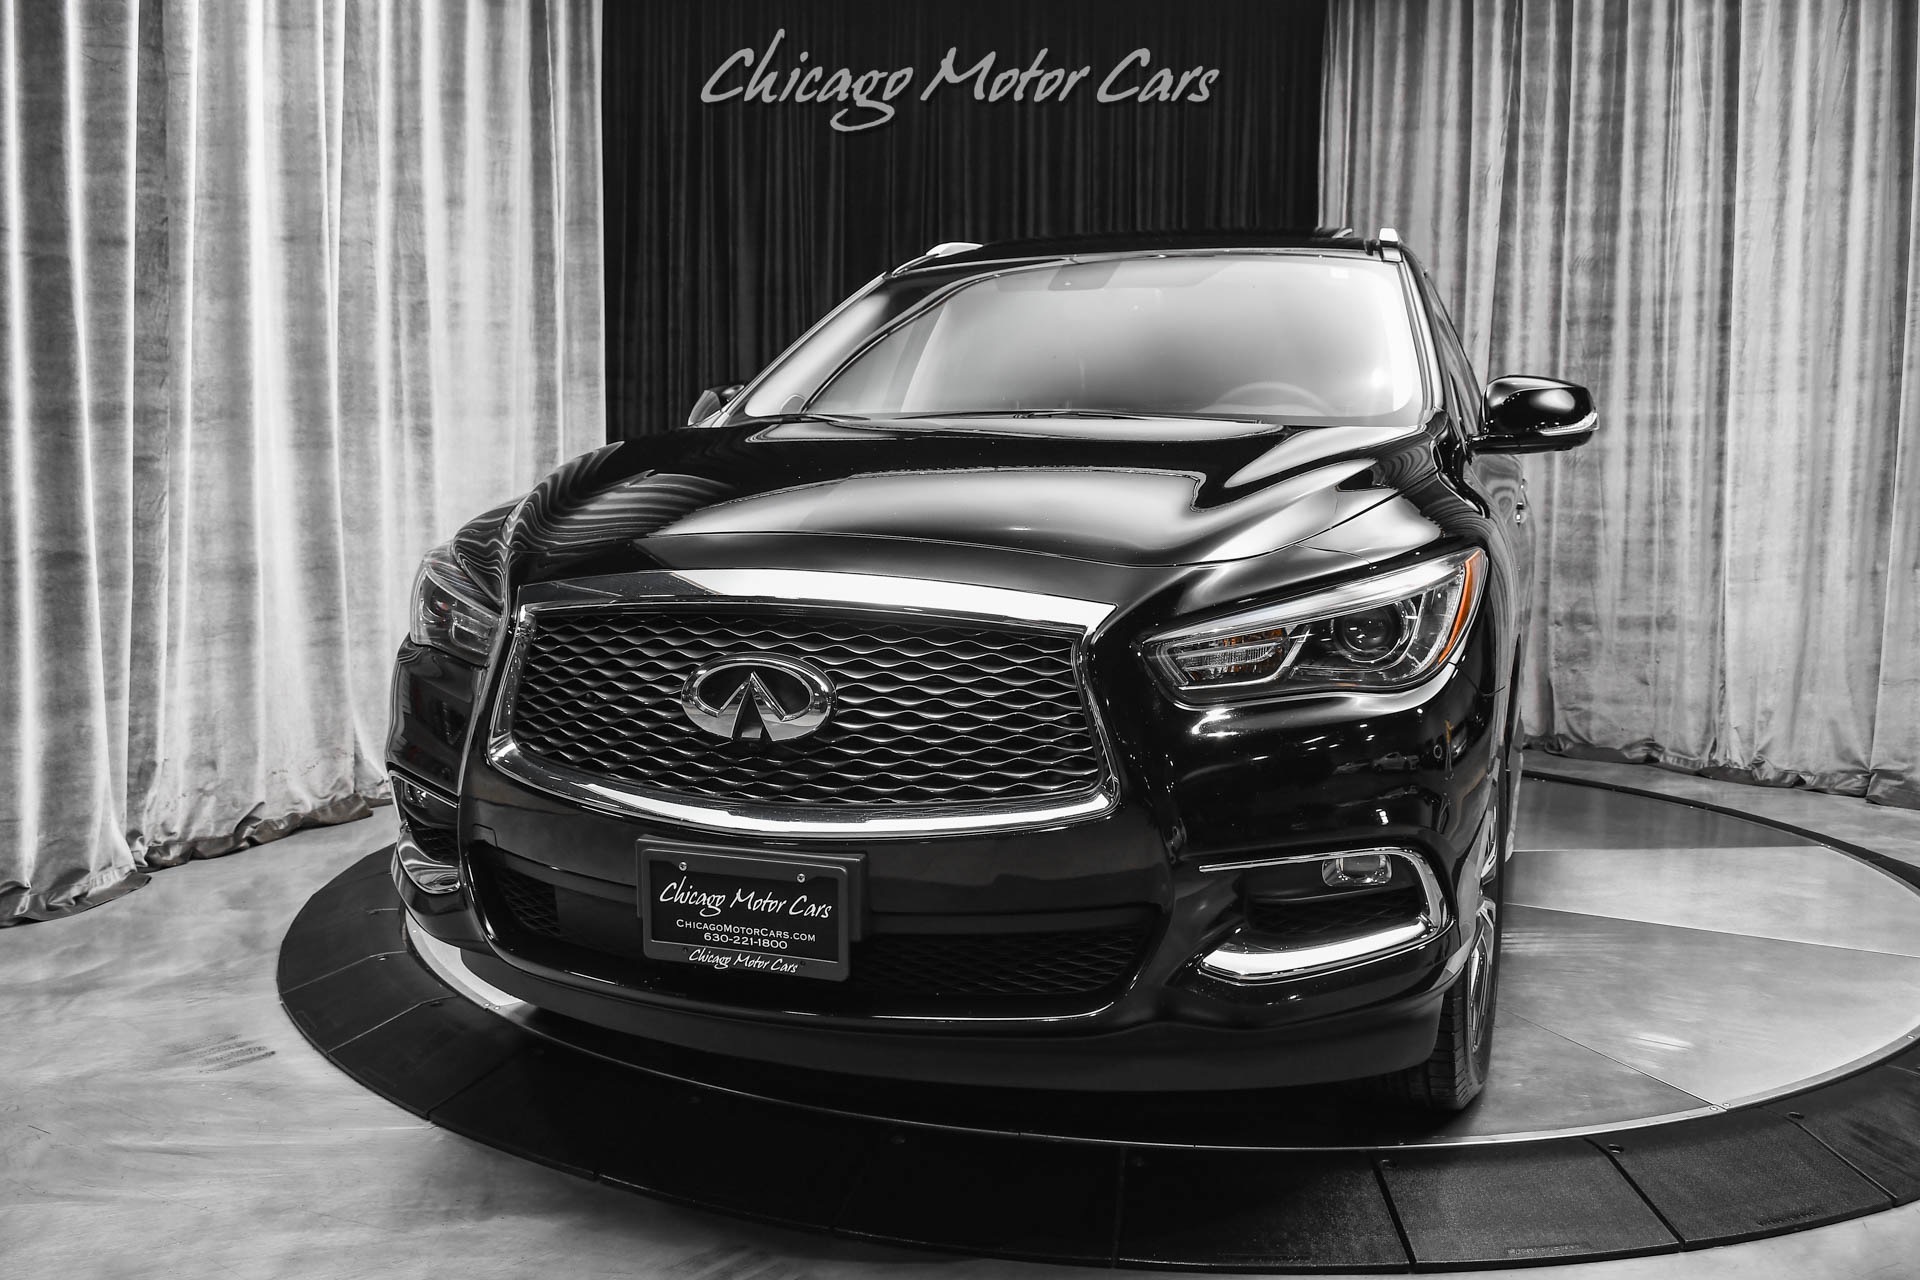 Used-2017-INFINITI-QX60-AWD-51k-MSRP-Serviced-New-Tires-Premium-Plus-Package-BOSE-Loaded